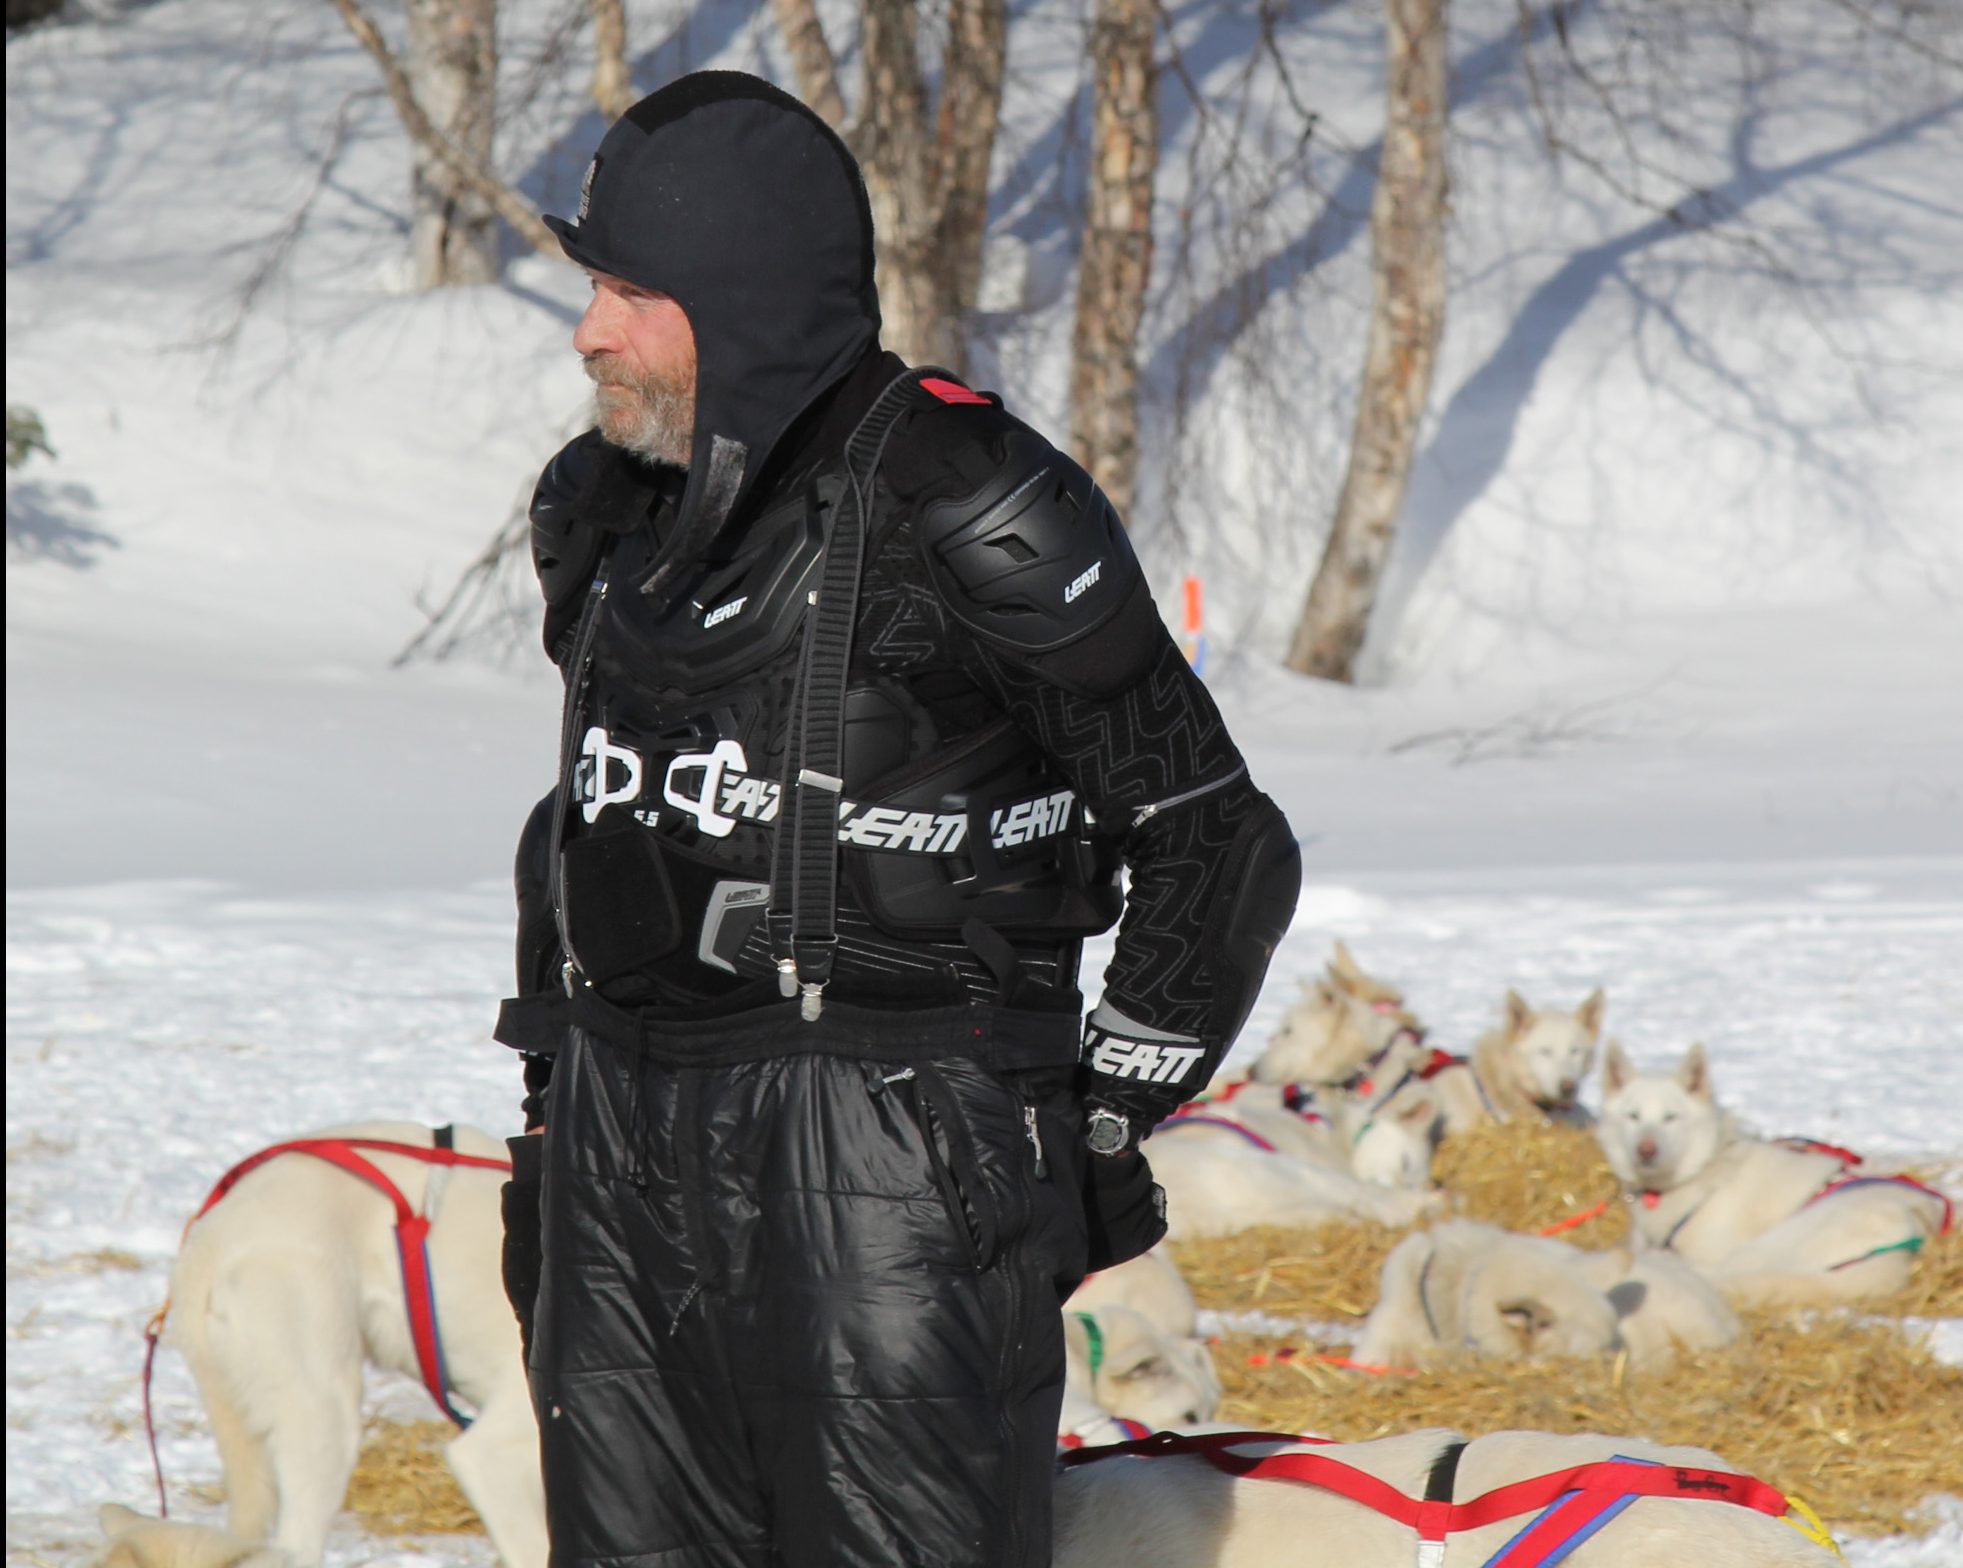 Meet the mushers dressing in “full body armor” during the Iditarod race